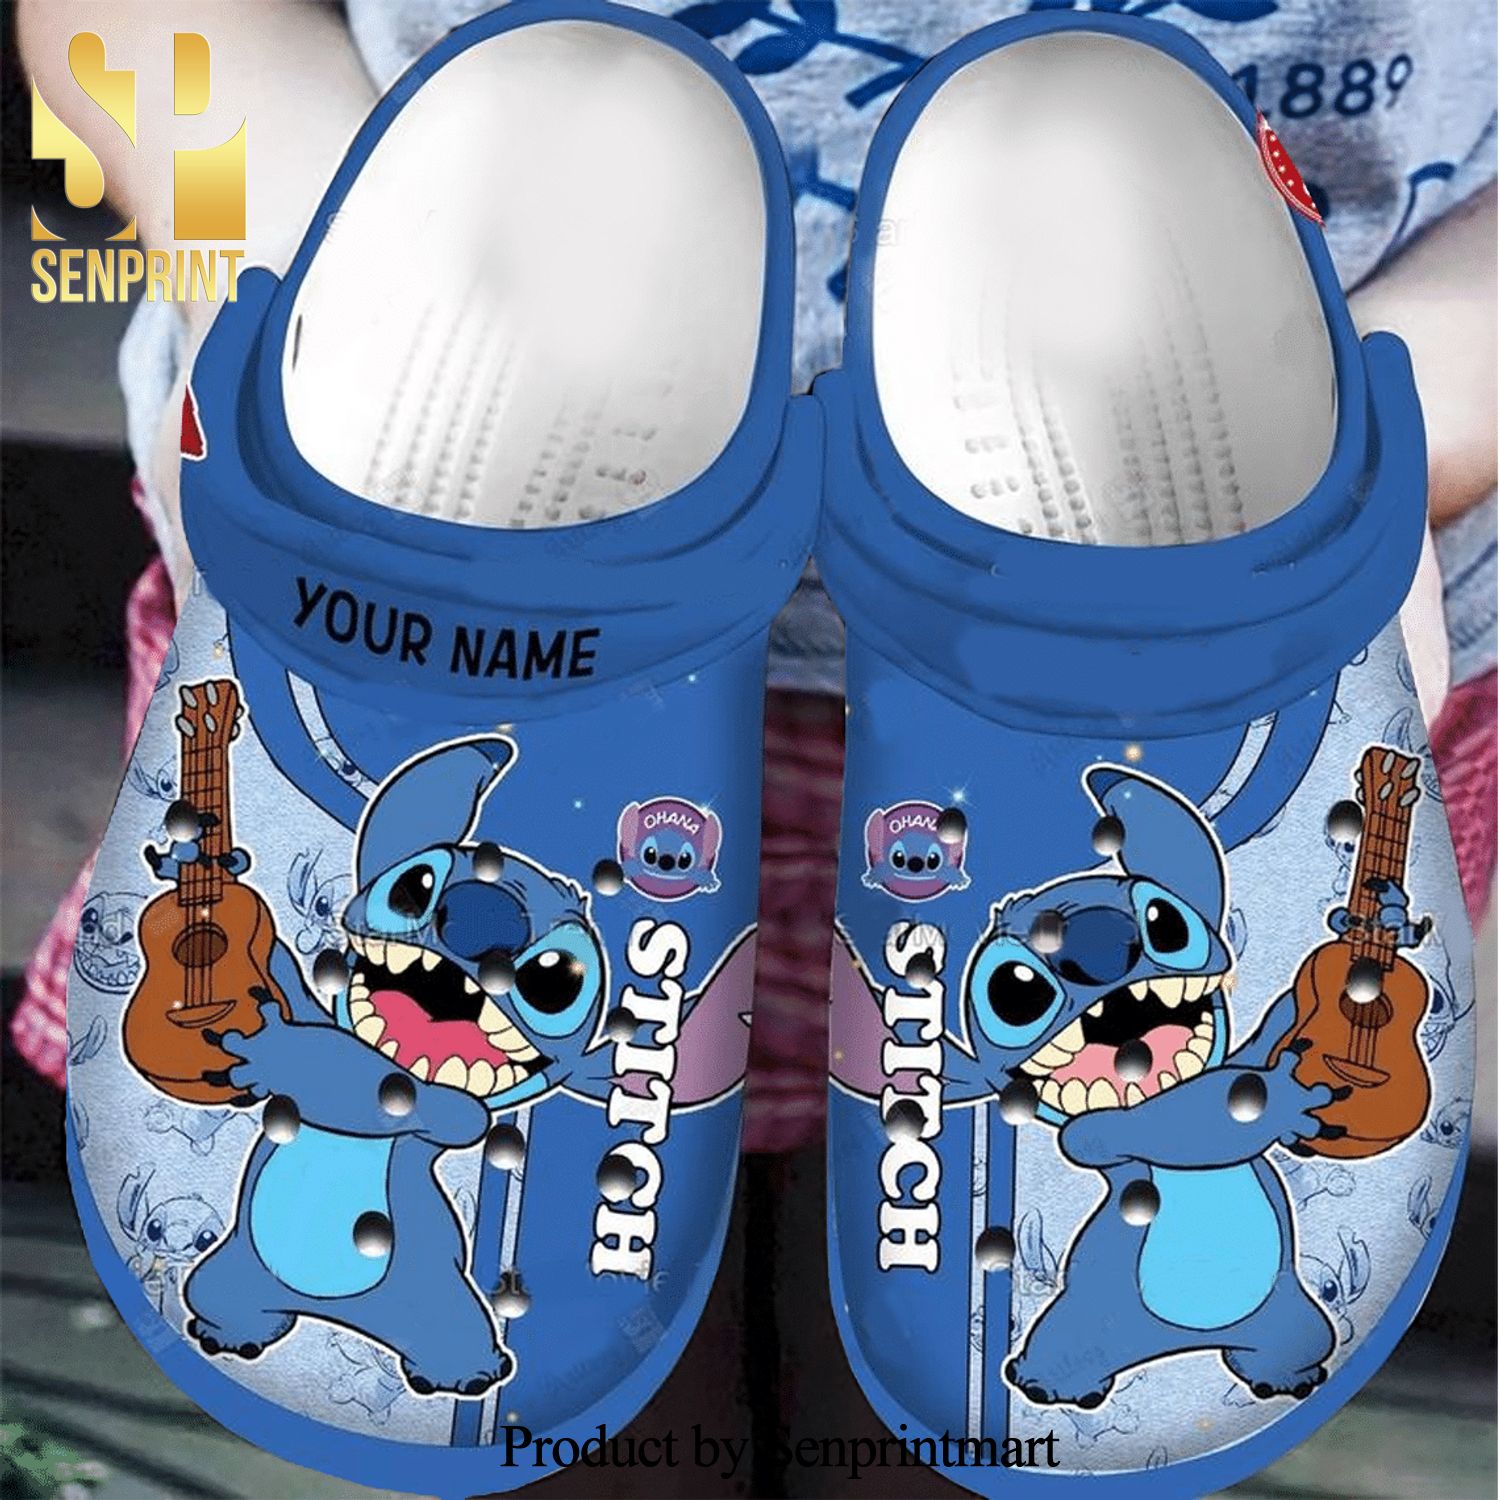 Stitch And Lilo Guitar For Men And Women Crocs Unisex Crocband Clogs